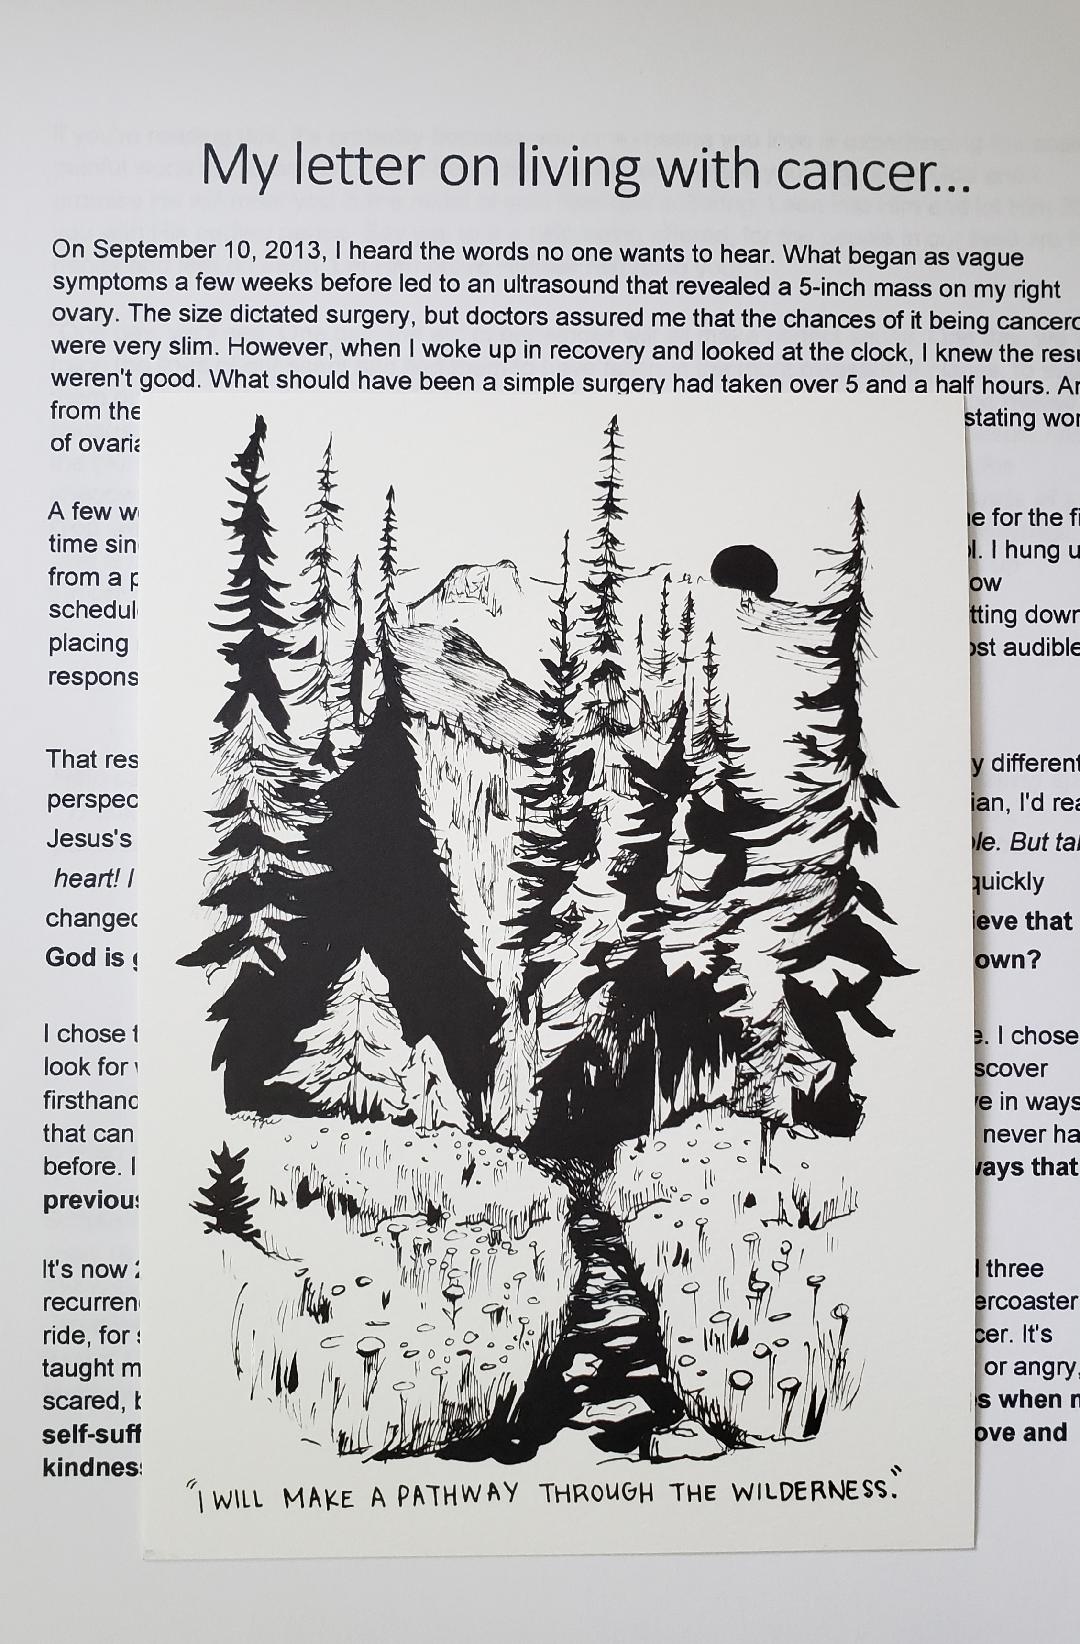 Pathway through the wilderness (LIVING WITH CANCER) - *letter and card only